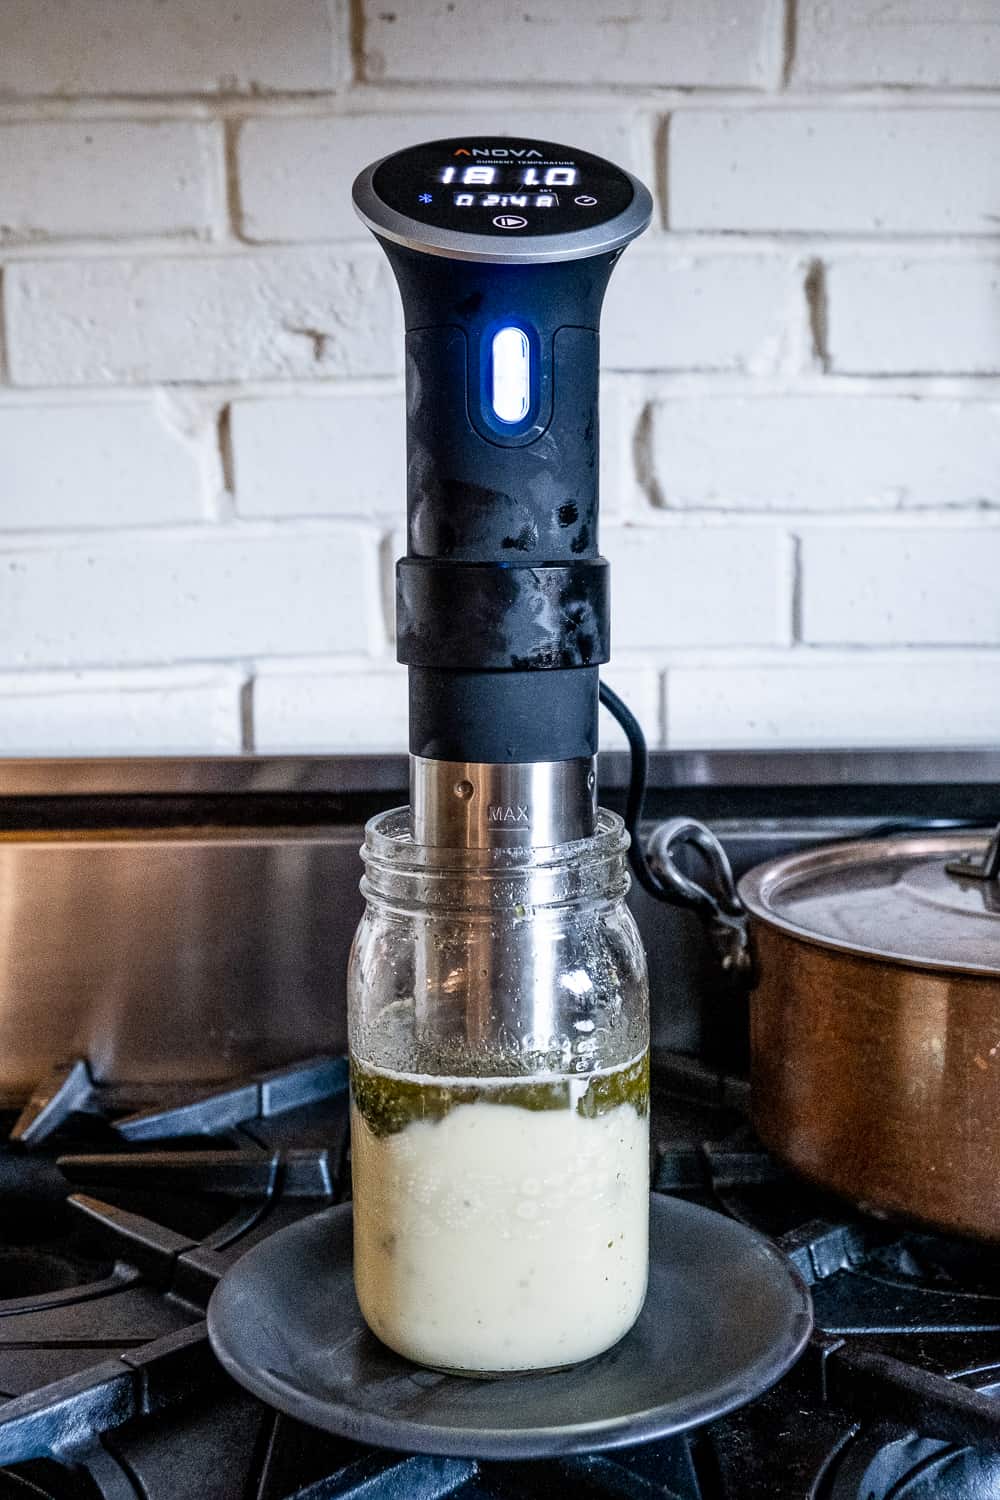 A sous vide stick in a mason jar being used to infuse cannabutter showing a temperature of 180 F.